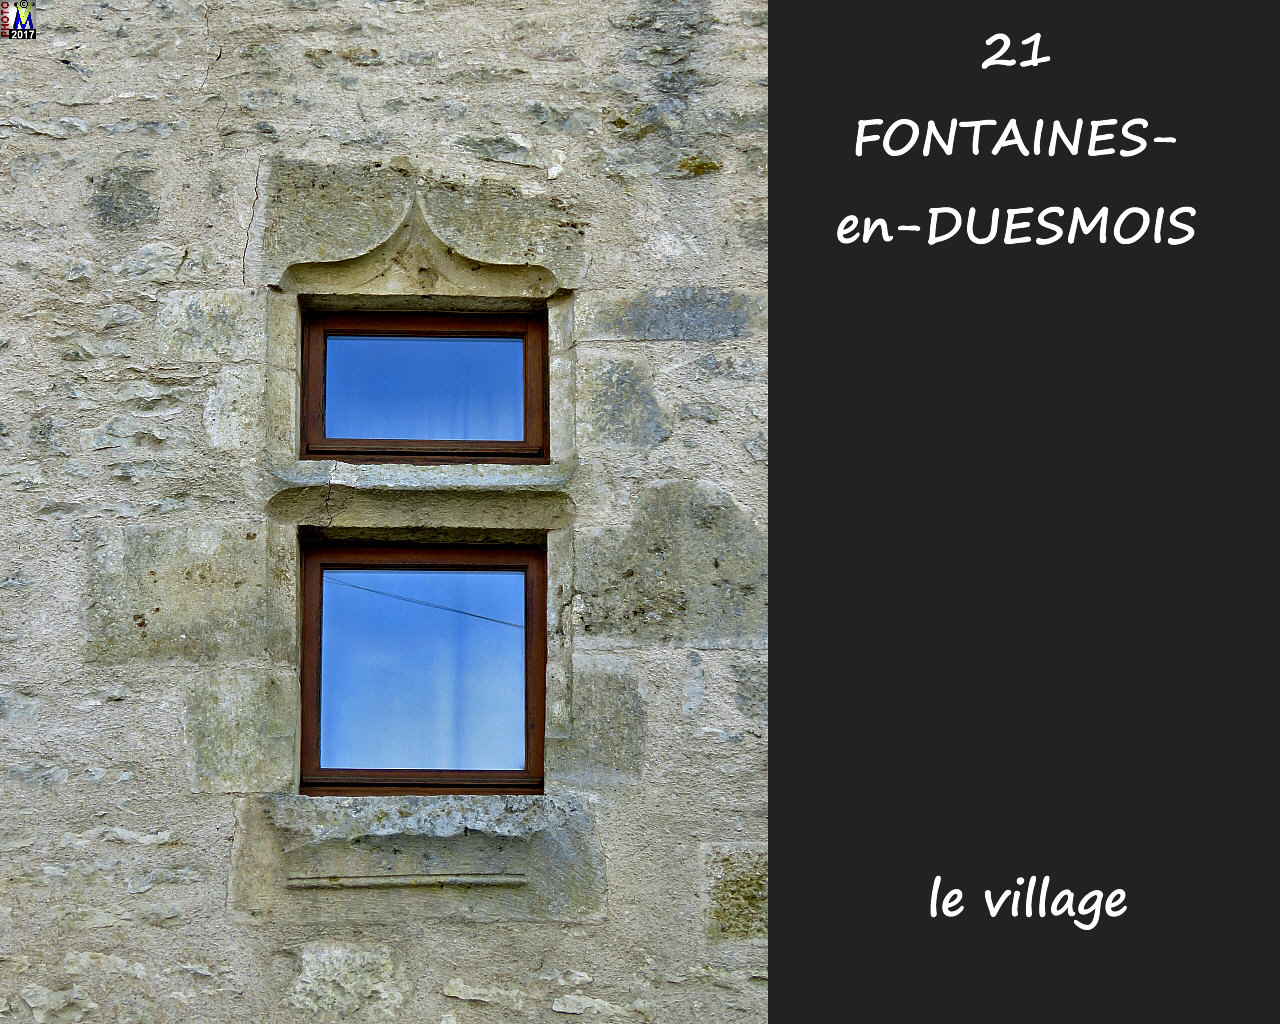 21FONTAINES-DUESMOIS_village_104.jpg